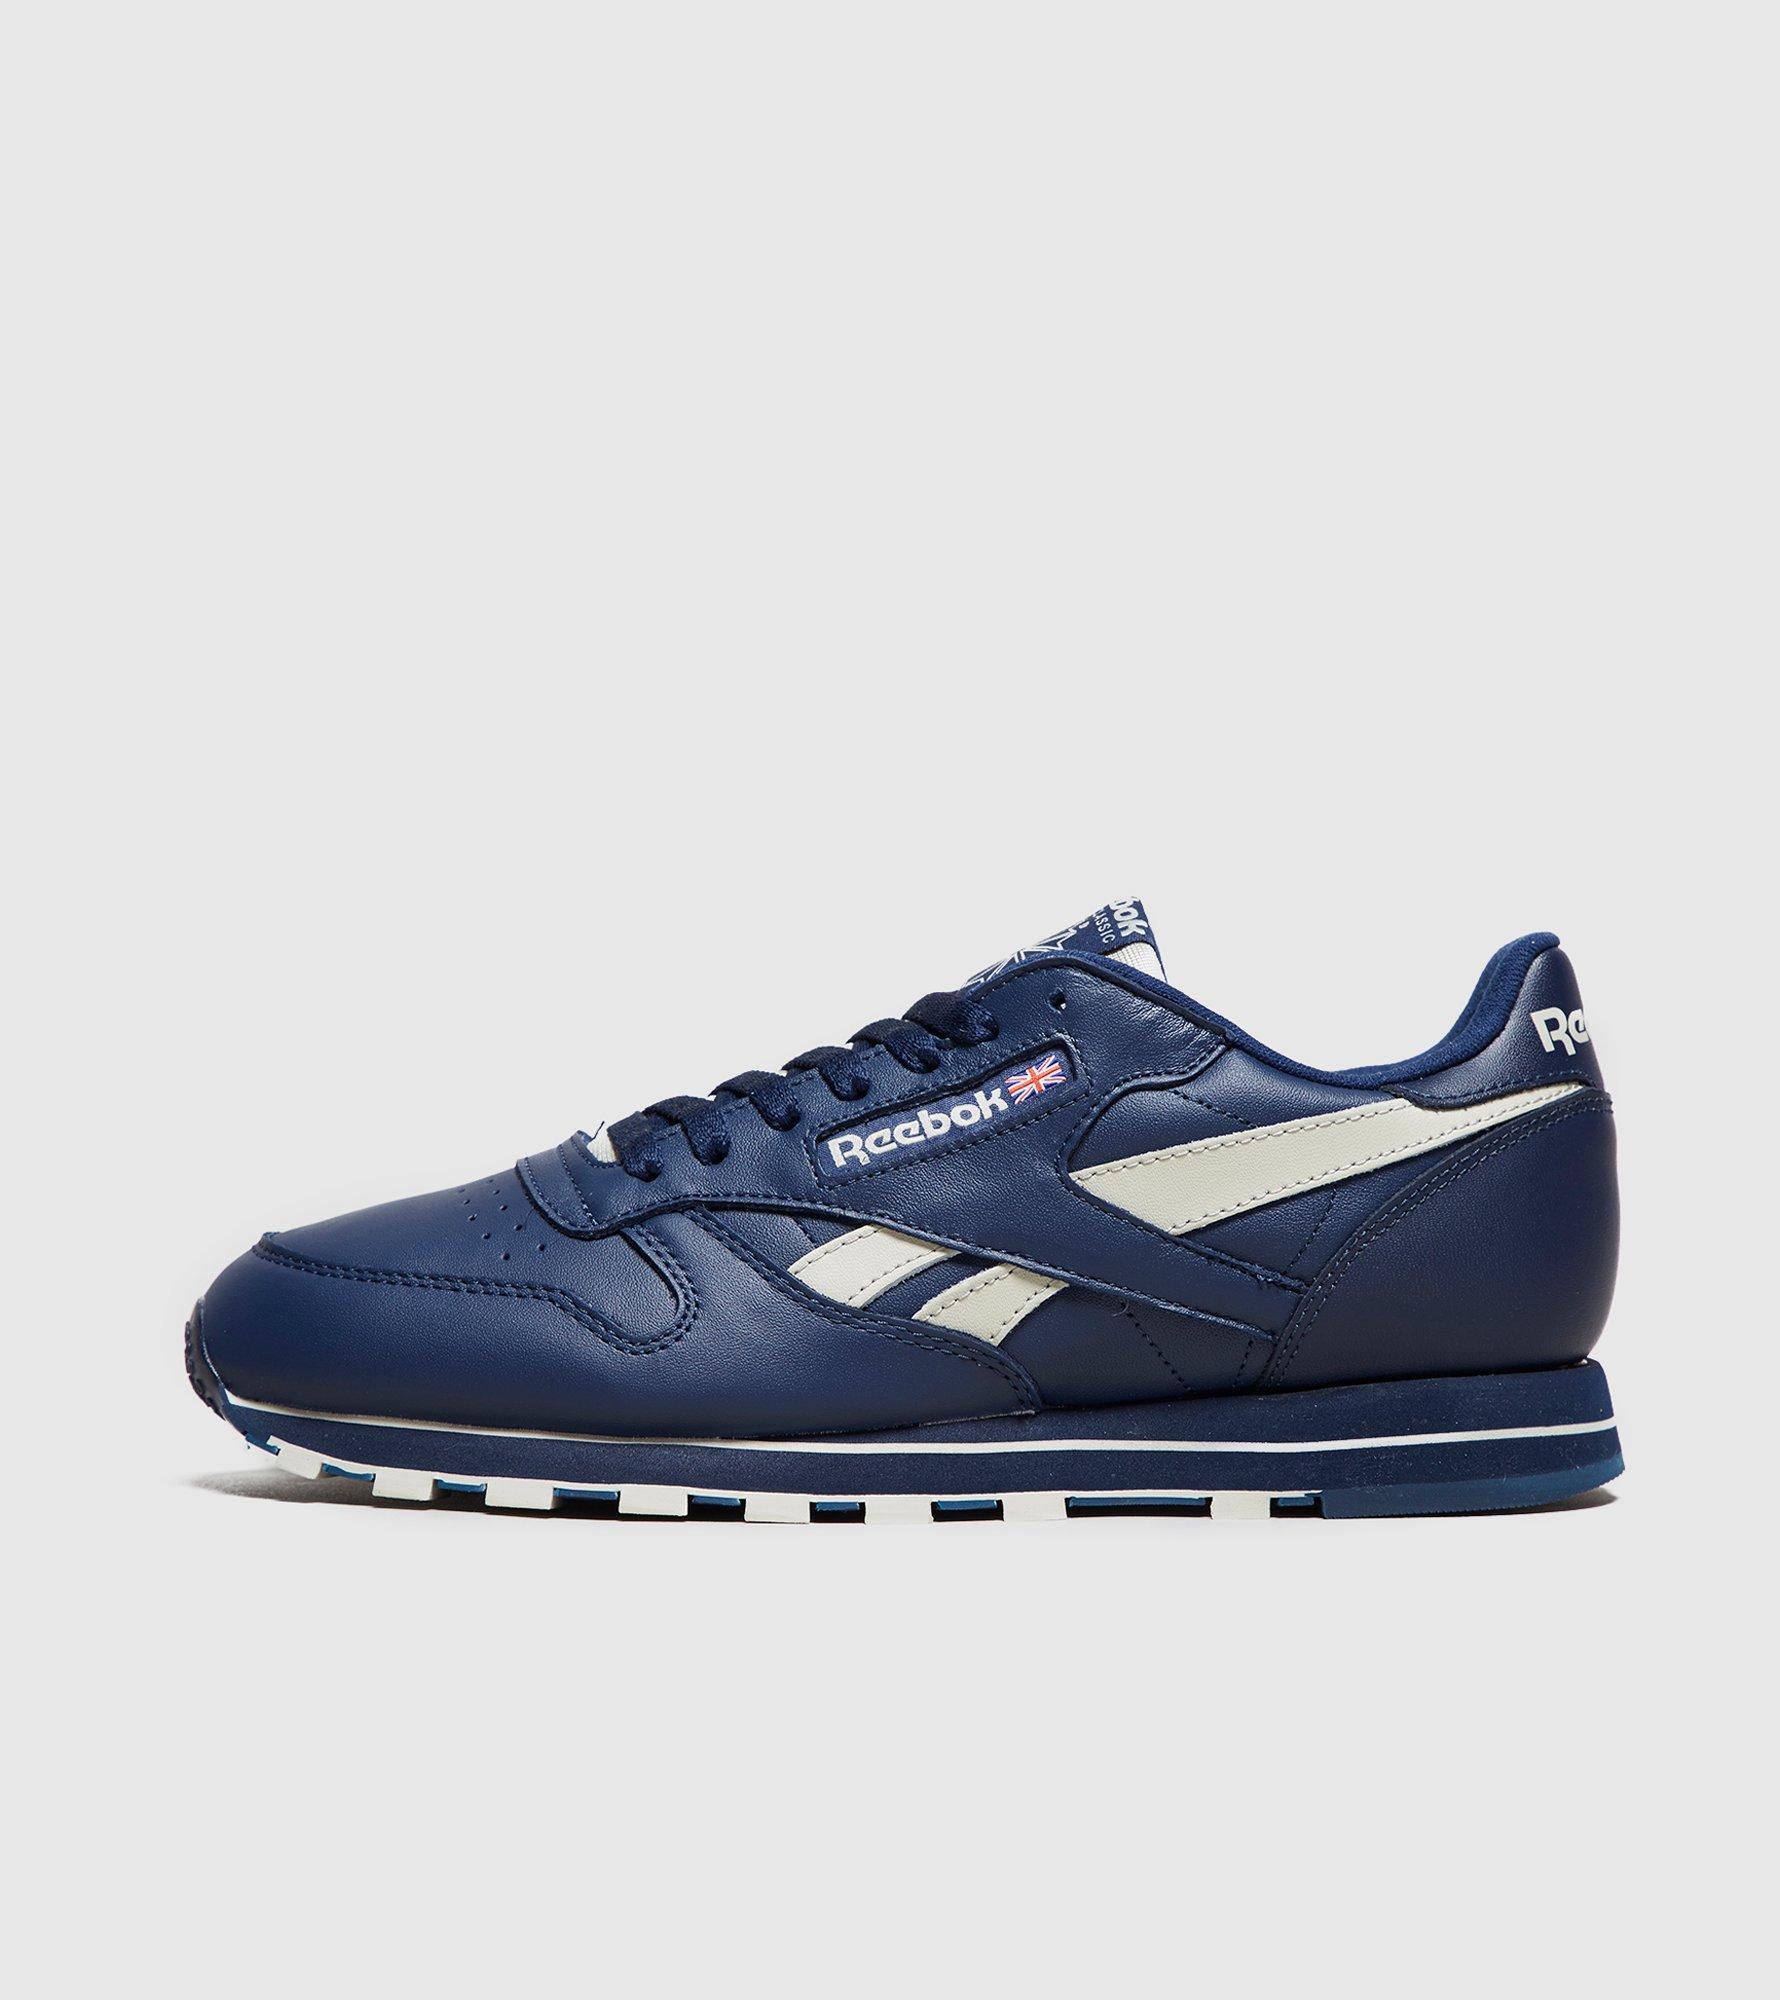 Reebok Classic Leather in Blue for Men - Lyst